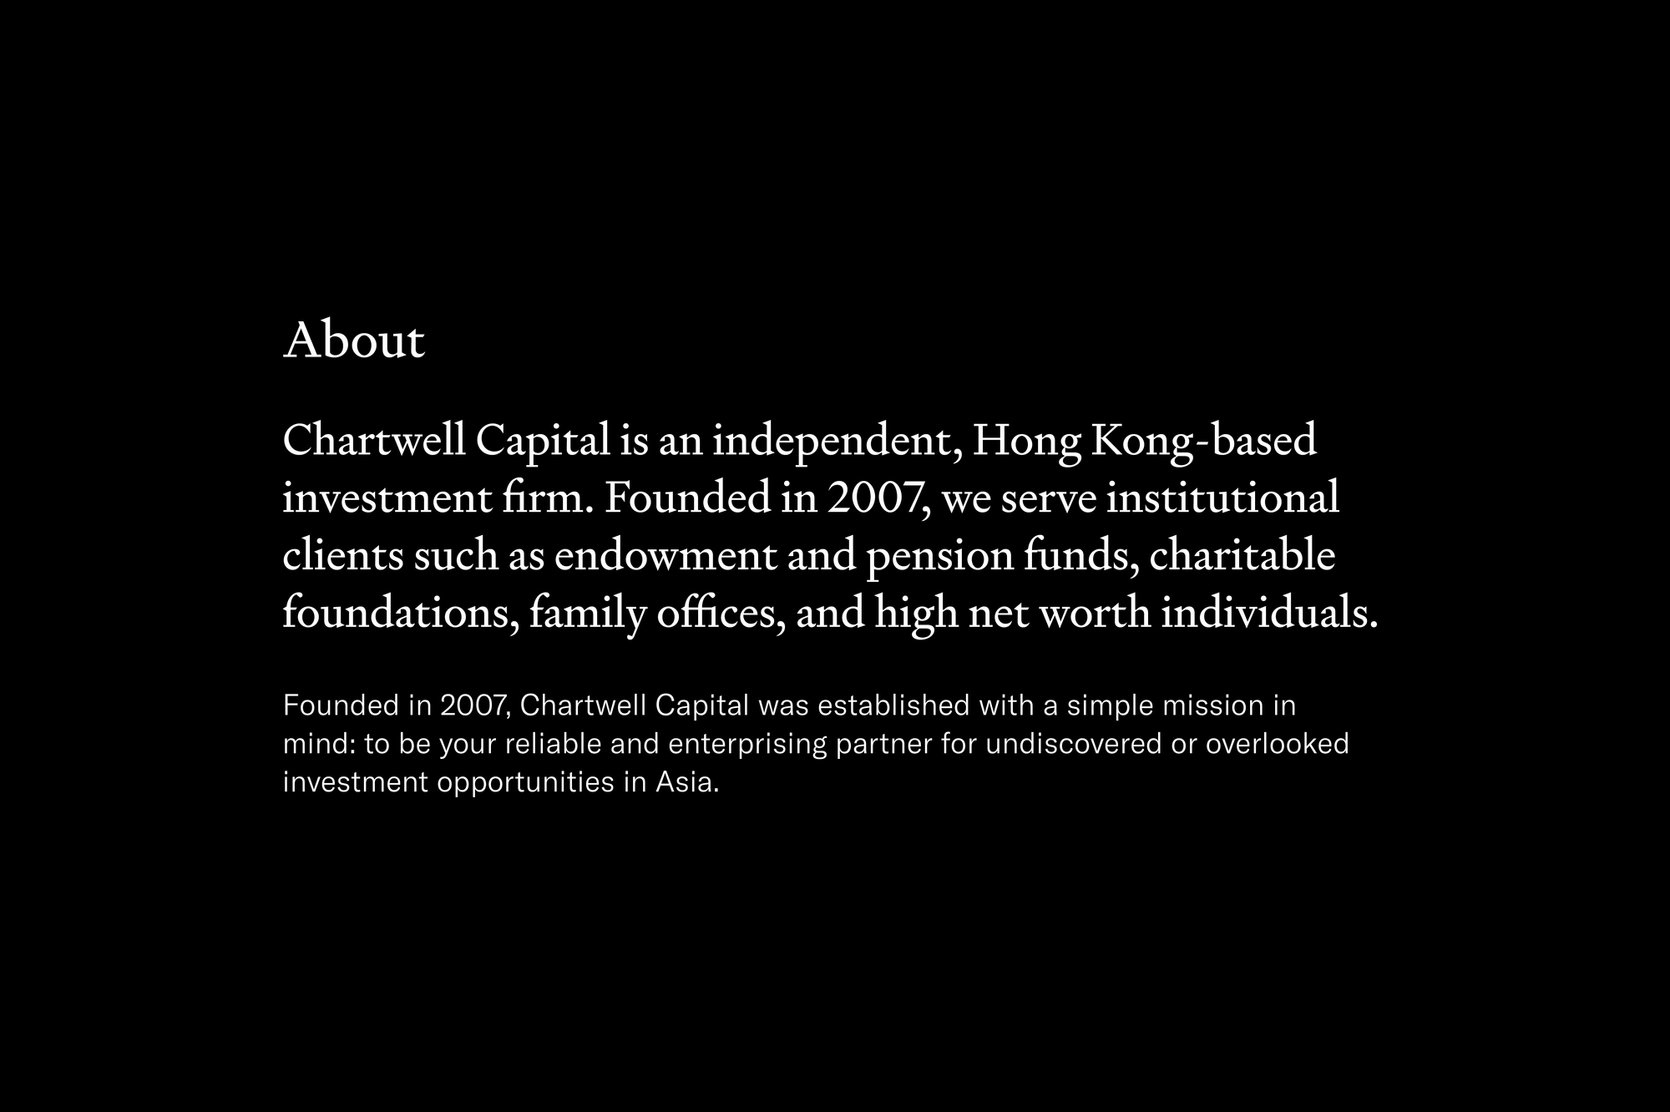 A demonstration of Chartwell Capital's information hierarchy with a heading, title, and body text.